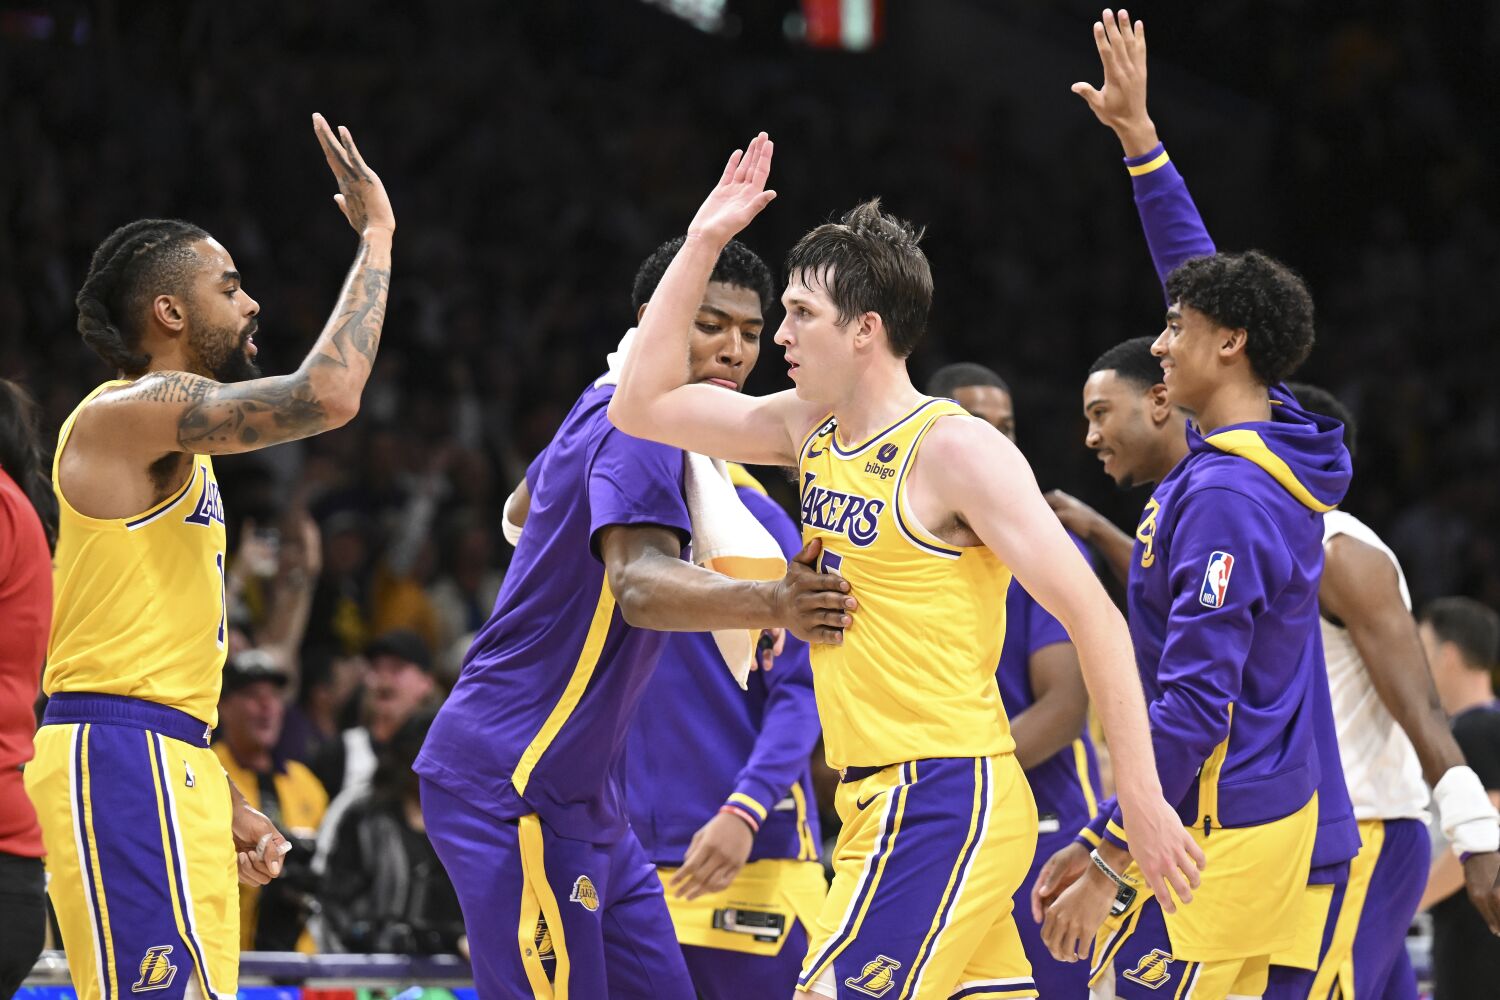 Plaschke: Rob Pelinka and the Lakers win free agency and the summer